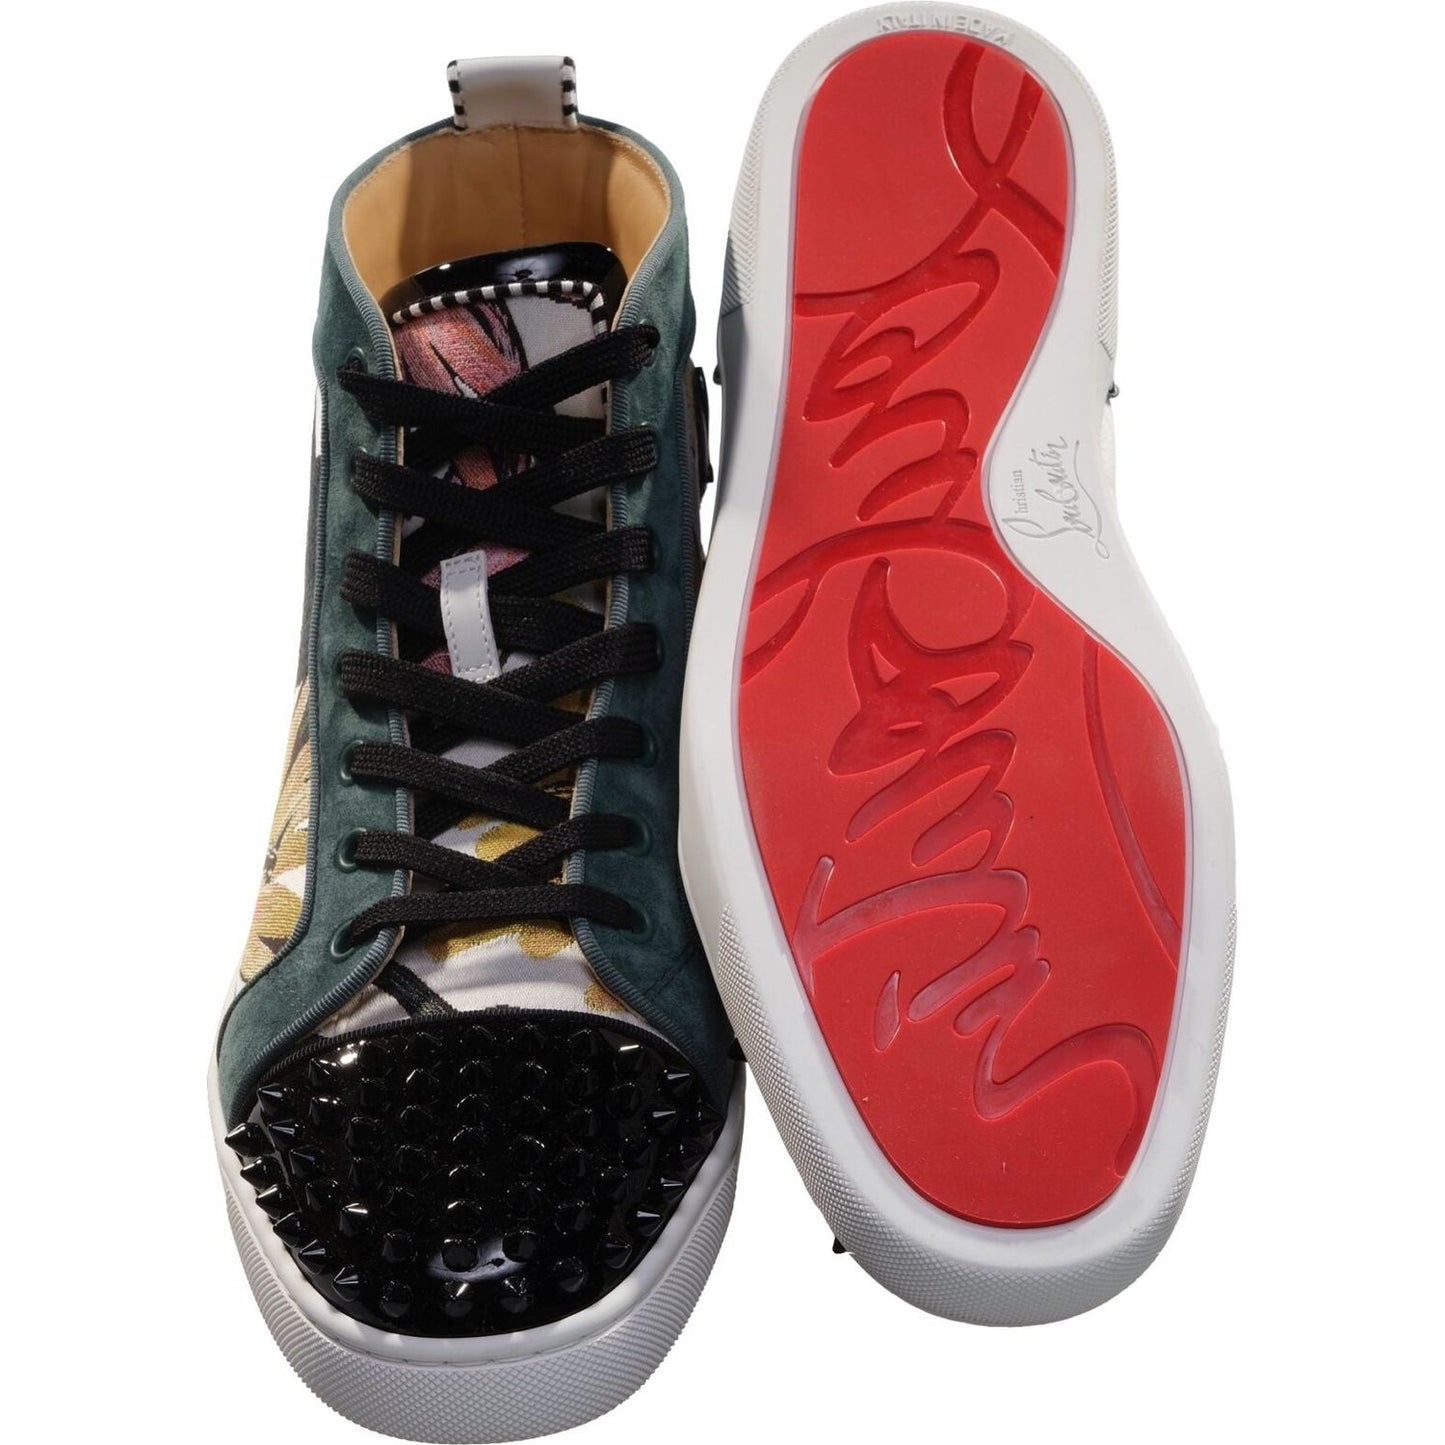 Louis Spikes Orlato Flat Printed Fabric Patterned High Top Sneakers